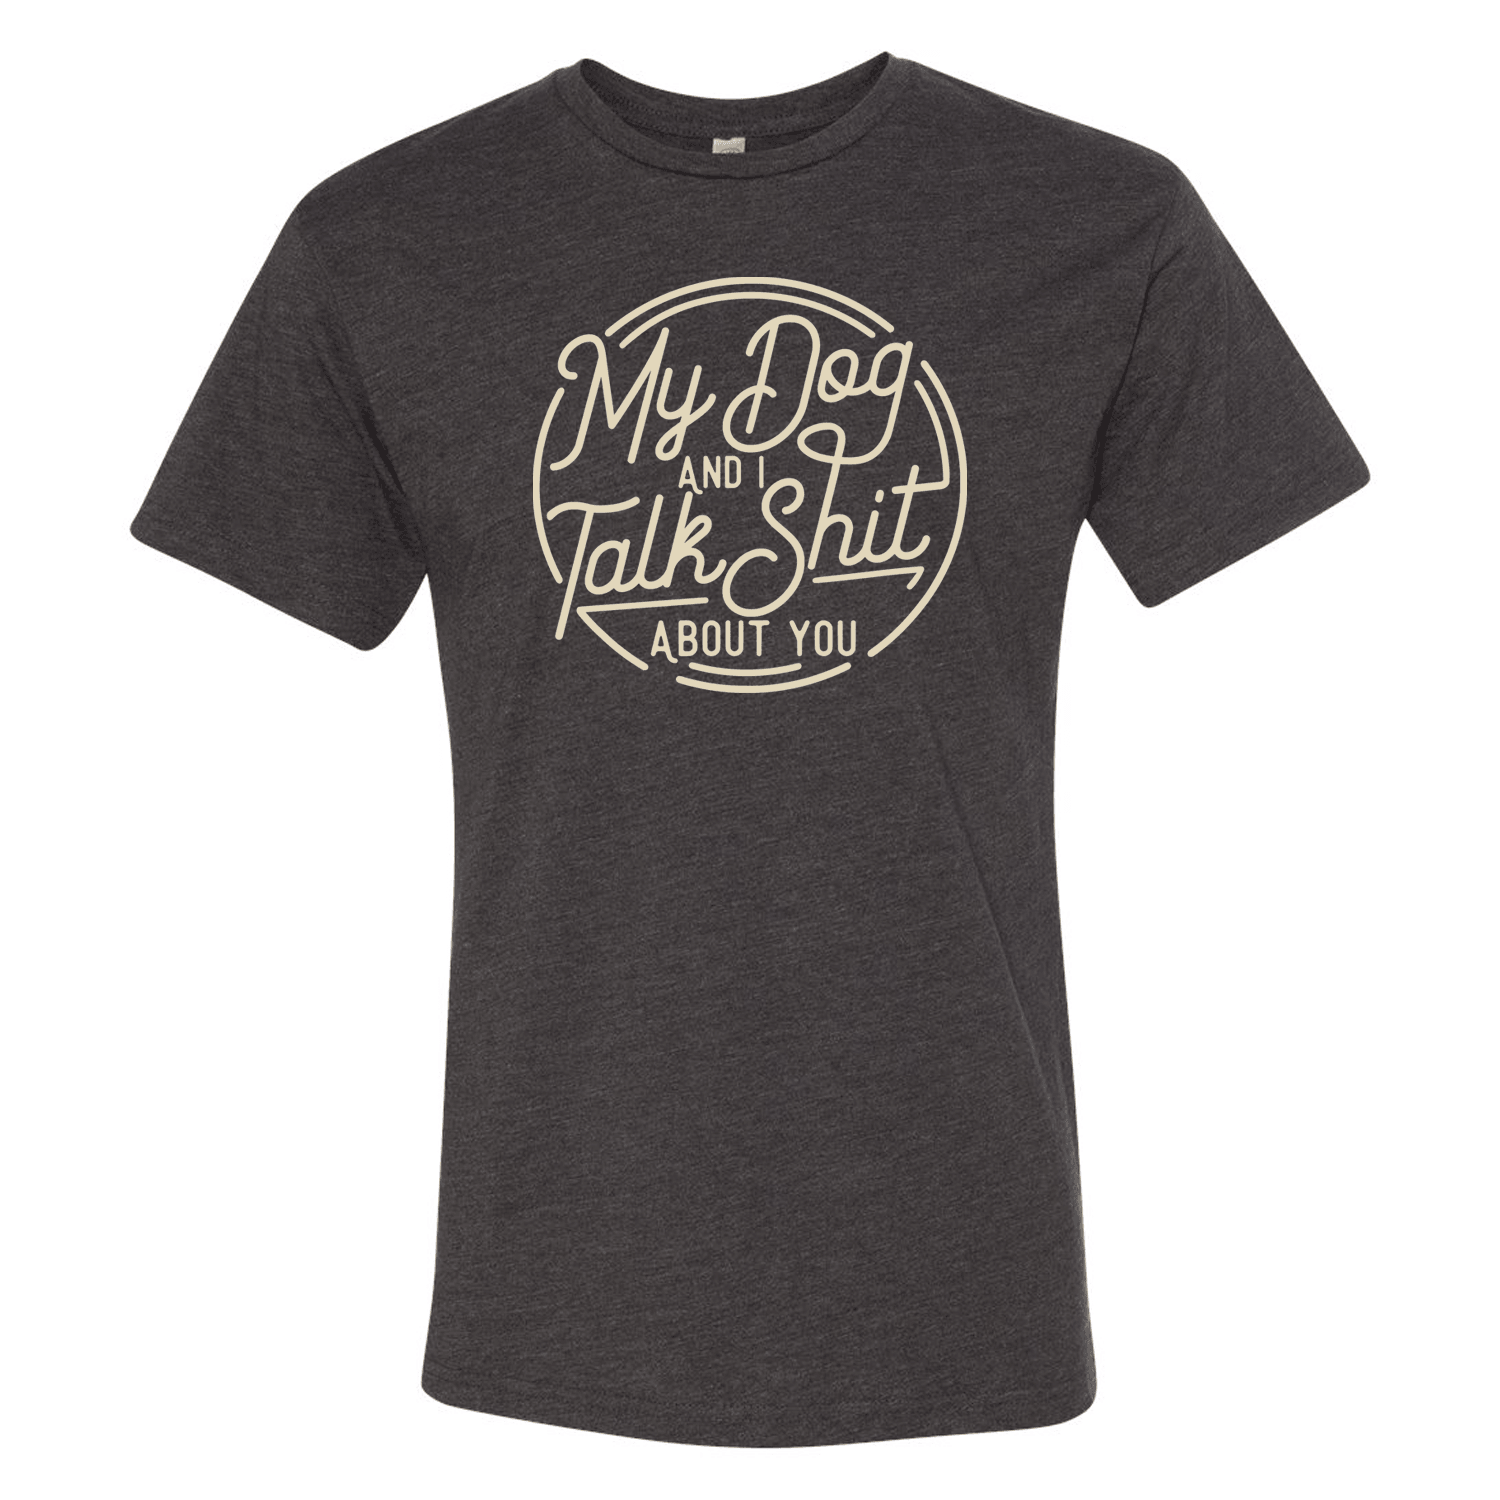 My Dog and I Talk Sh** About You T-Shirt - Ales to Trails